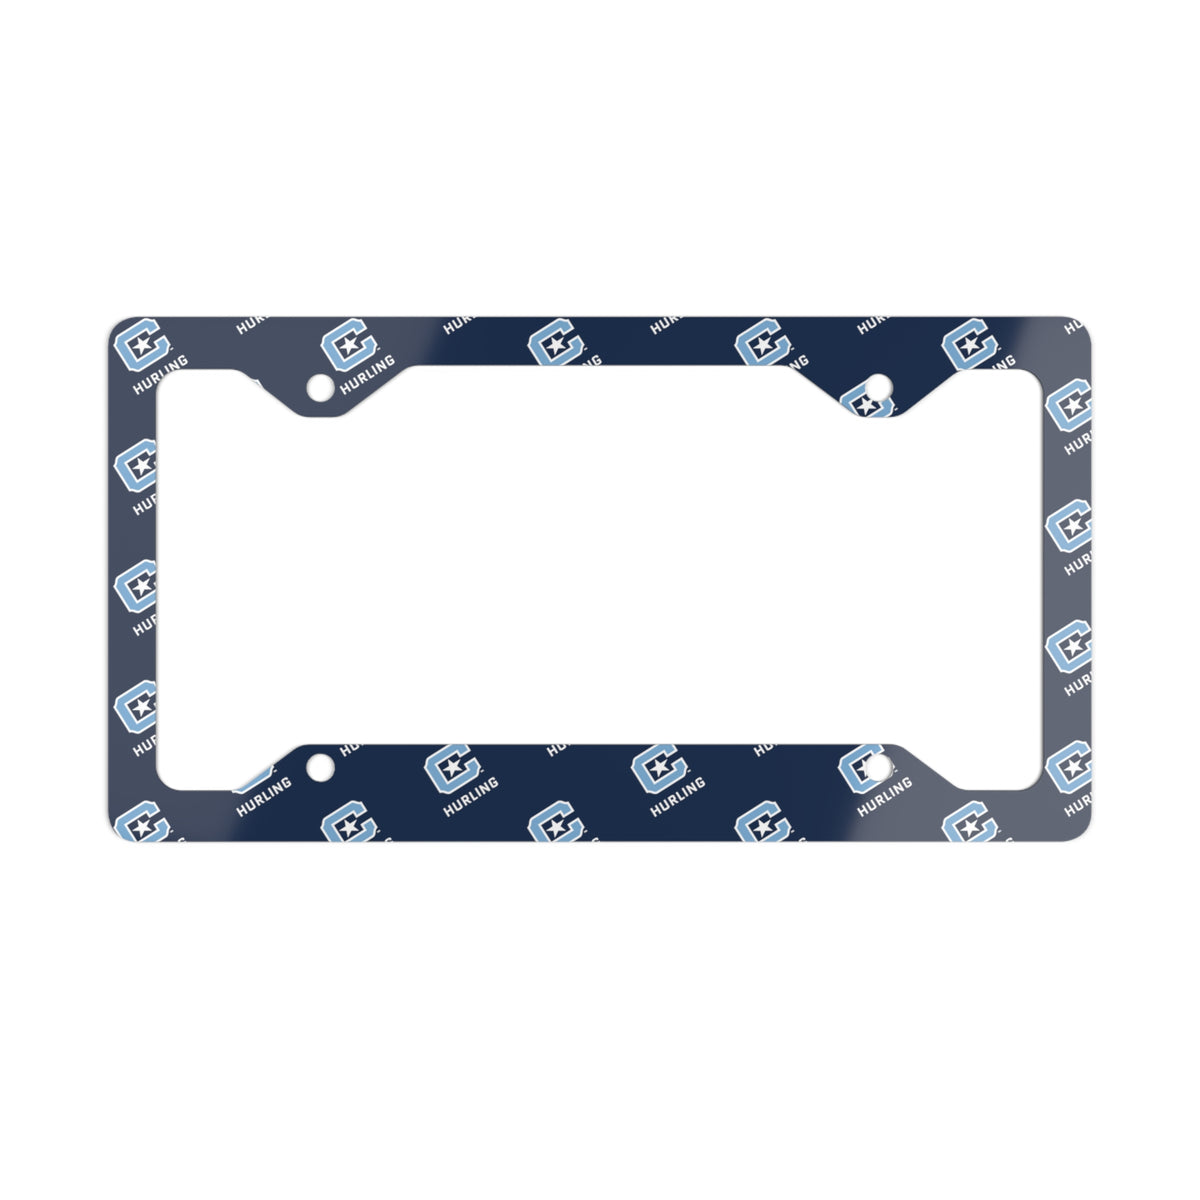 The Citadel, Sports Club, Hurling License Plate Frame